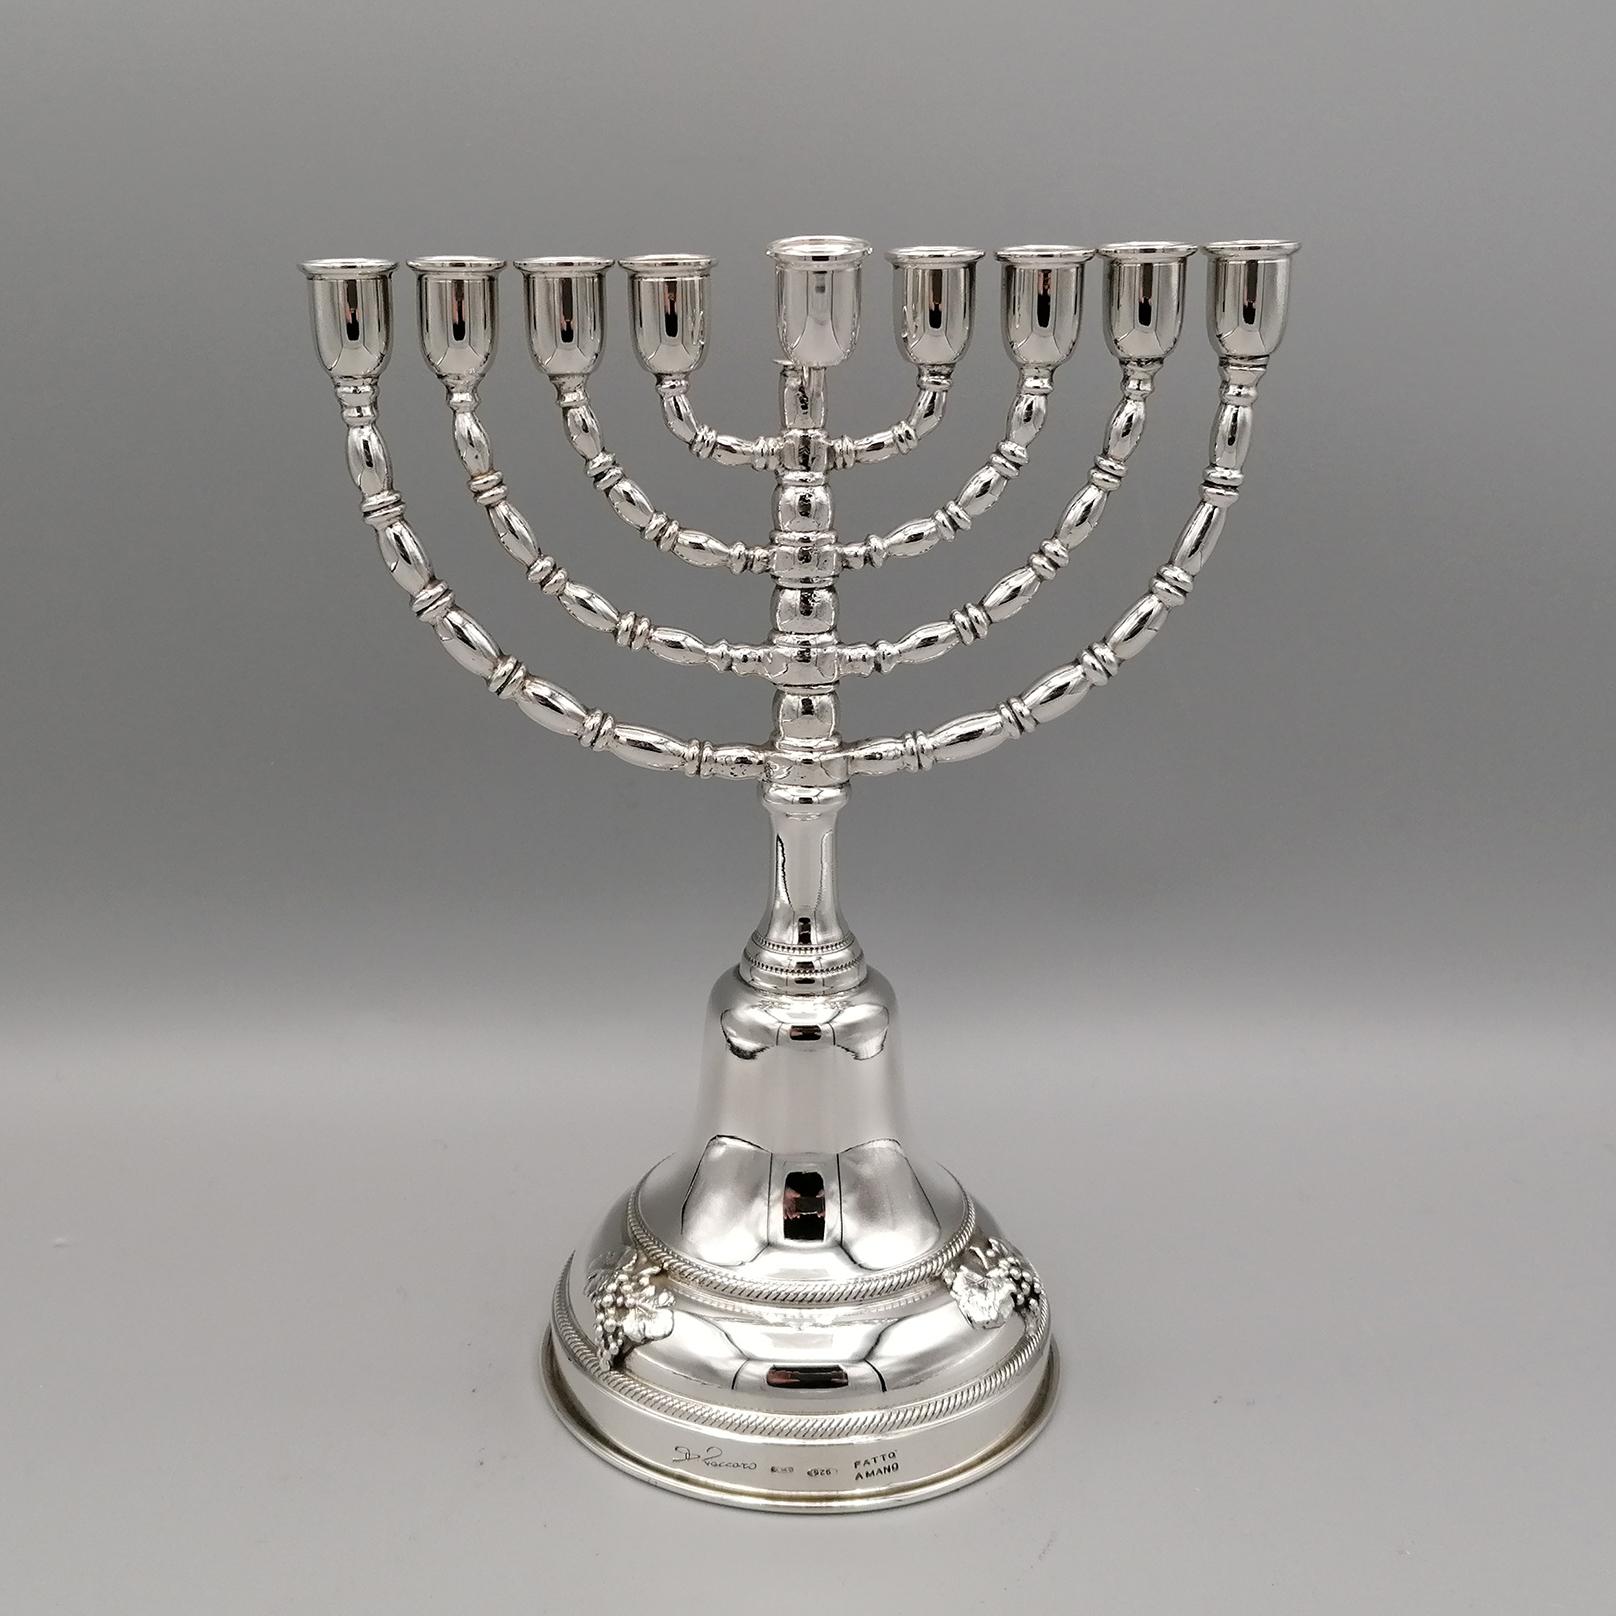 Hanukkah in sterling silver. The base is round shaped. Between two frames with a rope motif, 3 bunches of grapes with branches and leaves were applied for decoration. The central stem is shaped while the 8 arms are made with oval and ring motifs.